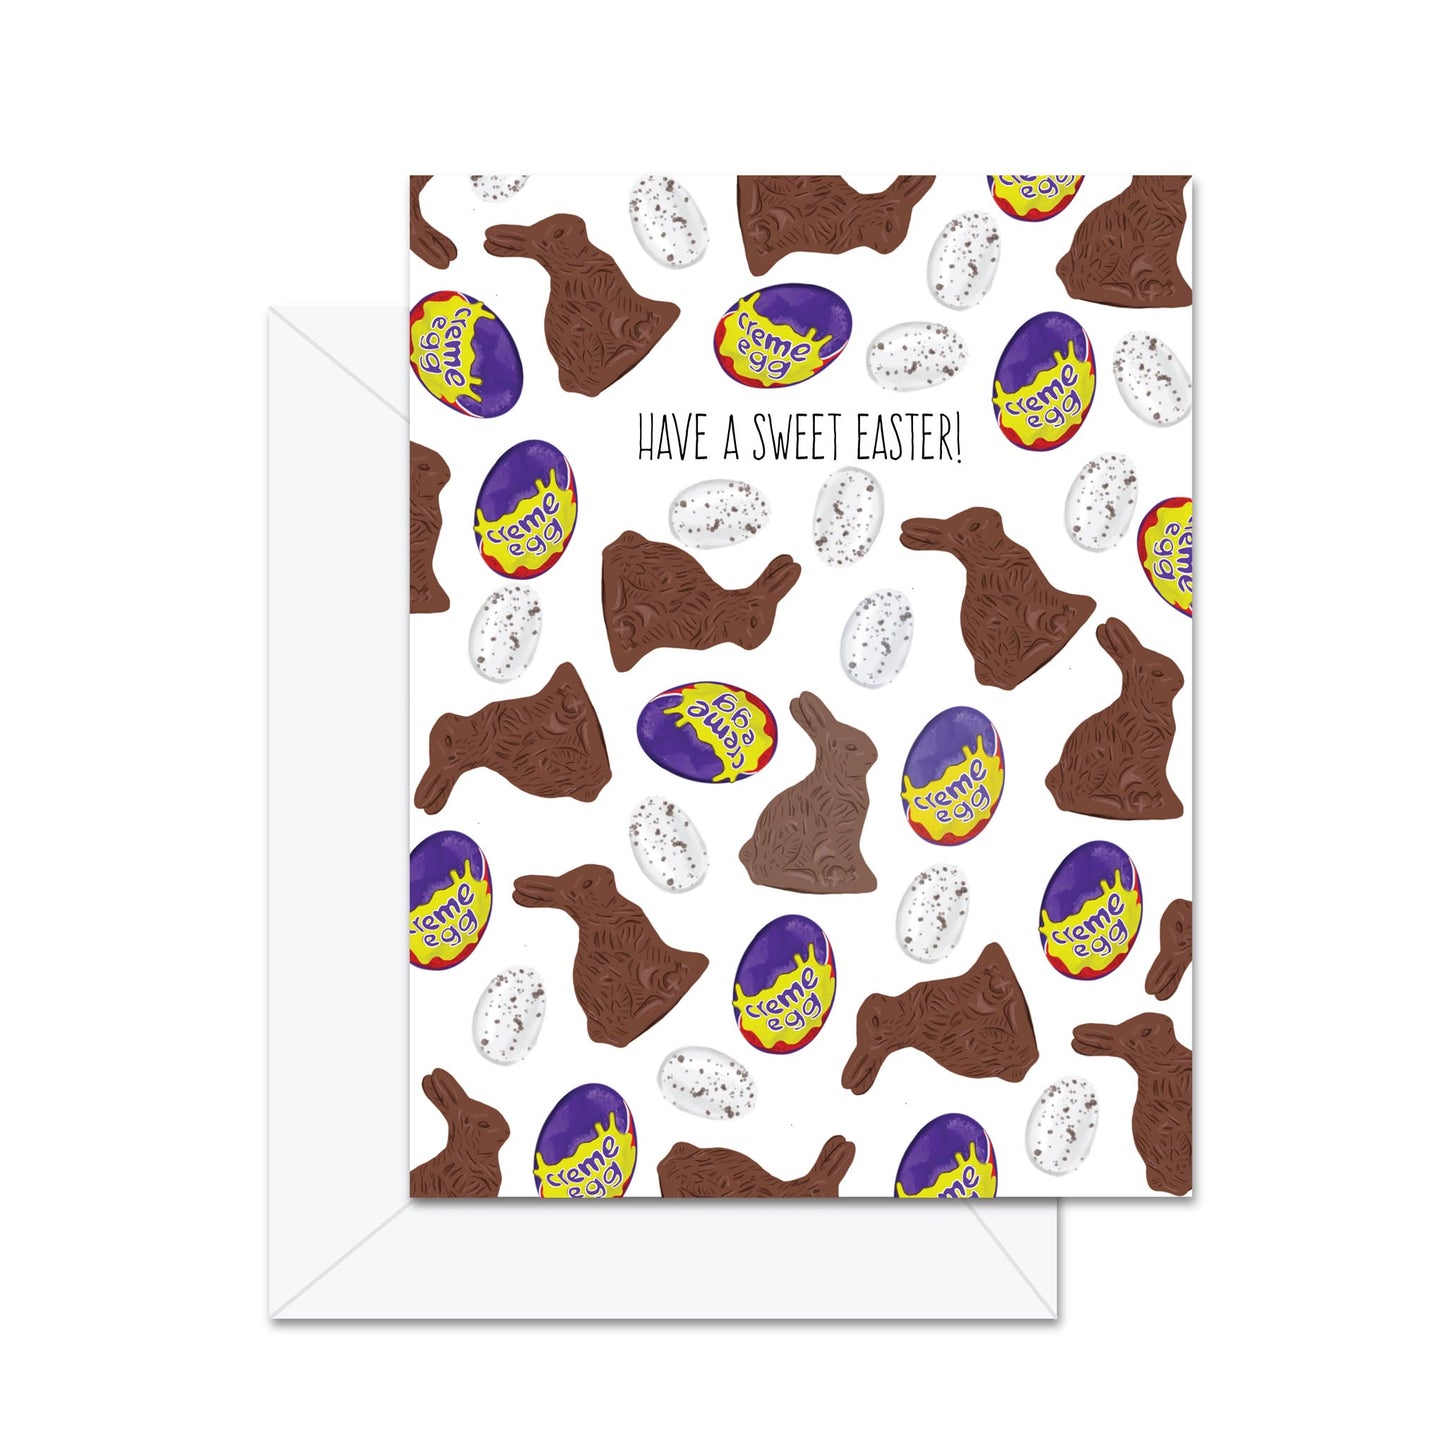 Have A Sweet Easter! - Greeting Card